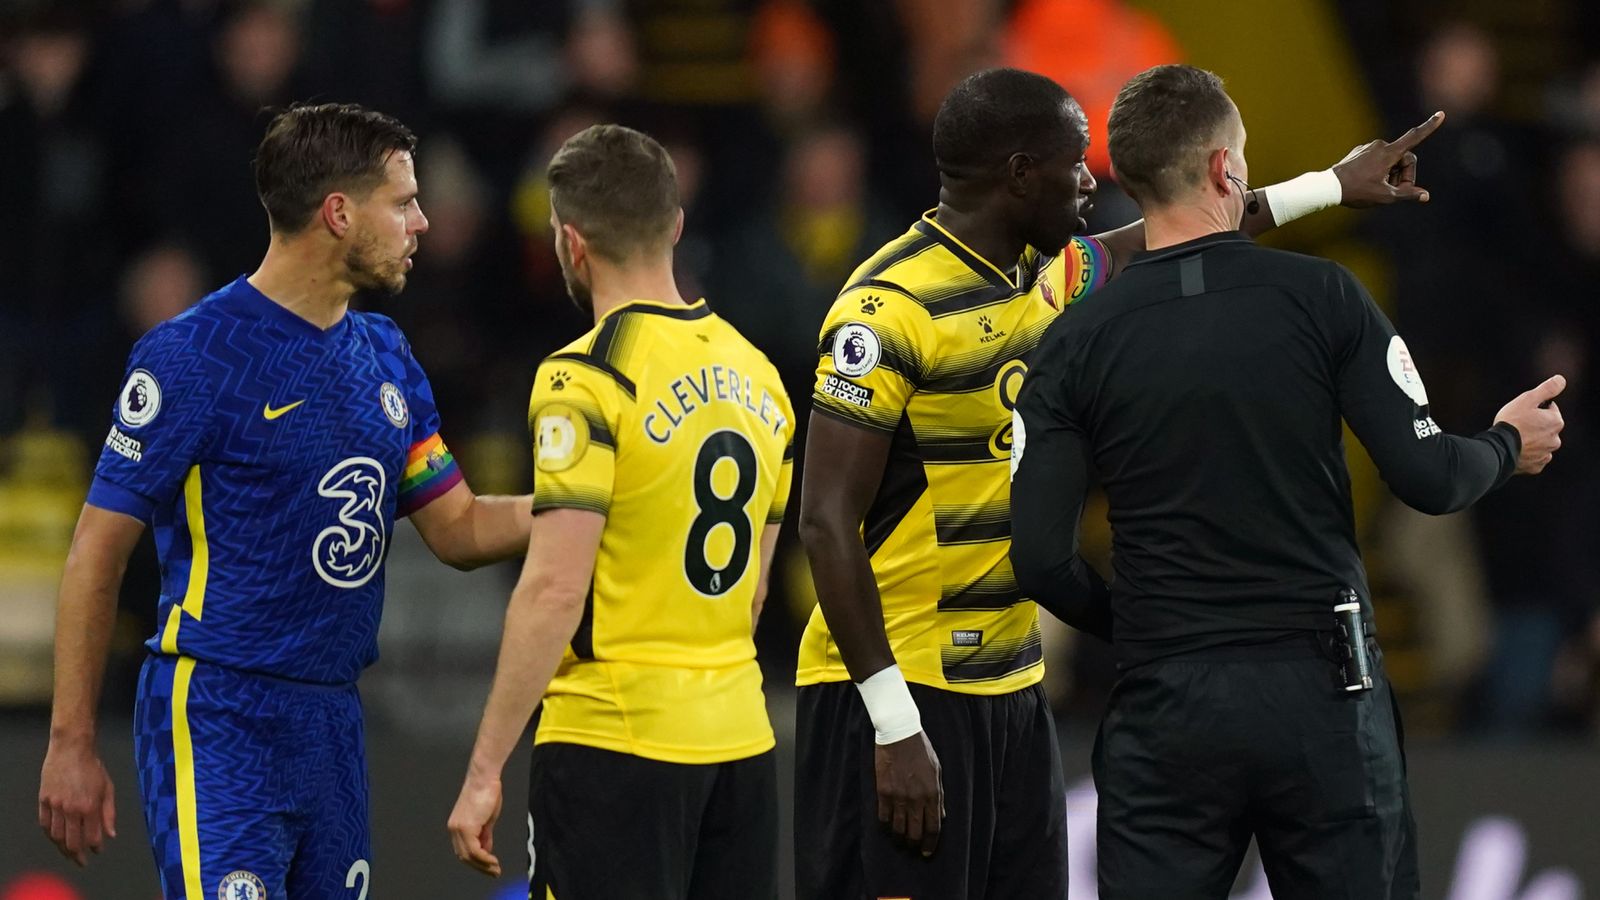 Fan 'stable' after cardiac arrest at Watford; Southampton medical emergency also confirmed